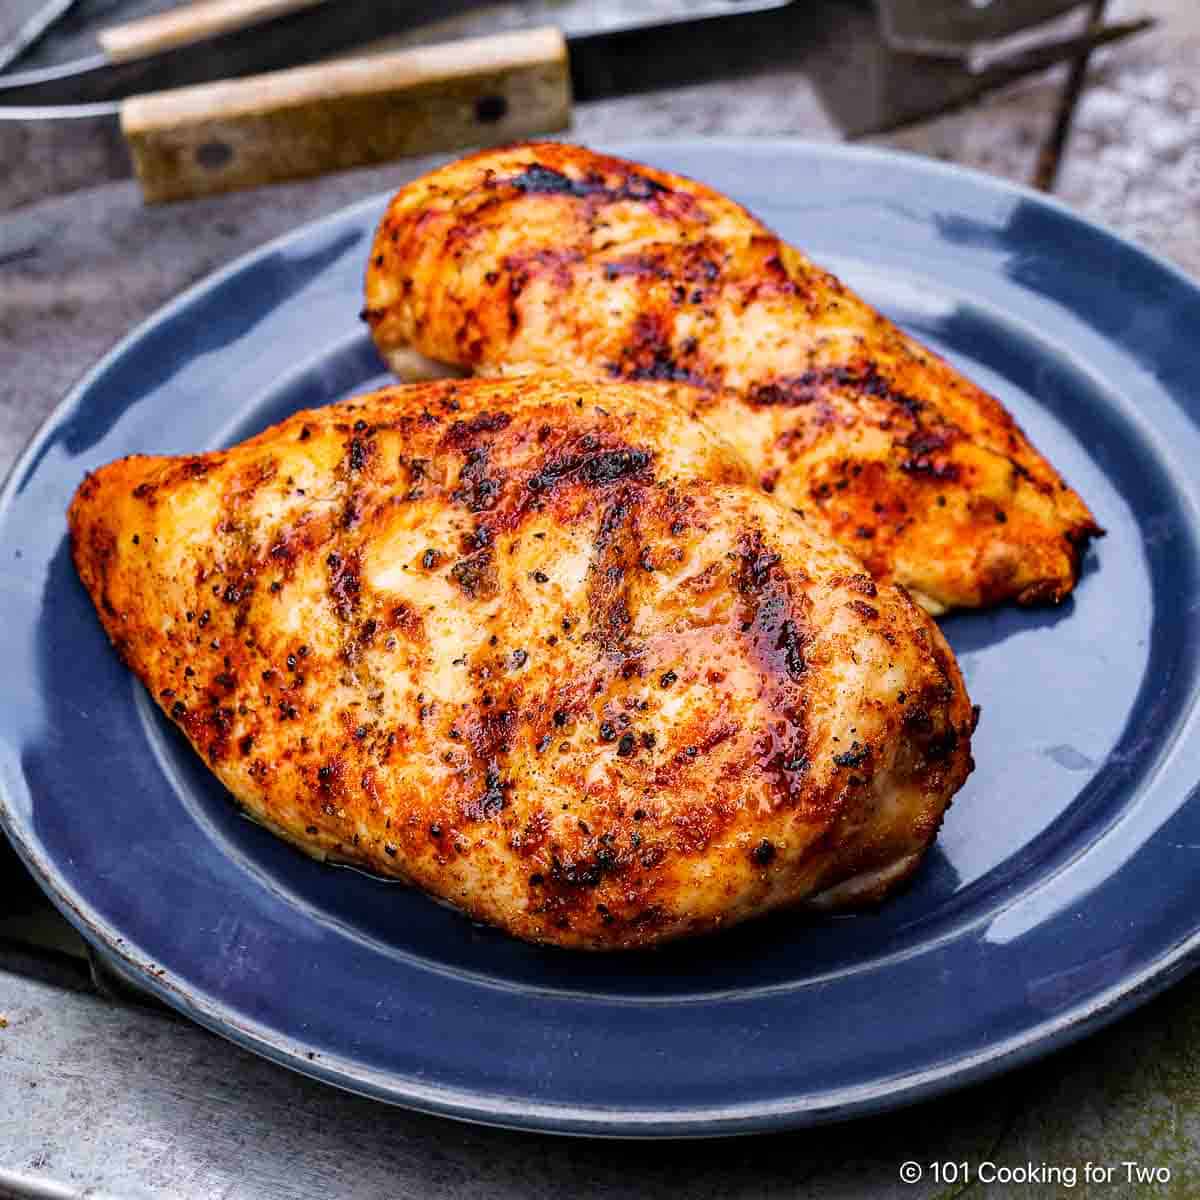 https://www.101cookingfortwo.com/wp-content/uploads/2019/06/grilled-chicken-breasts-on-blue-plate.jpg